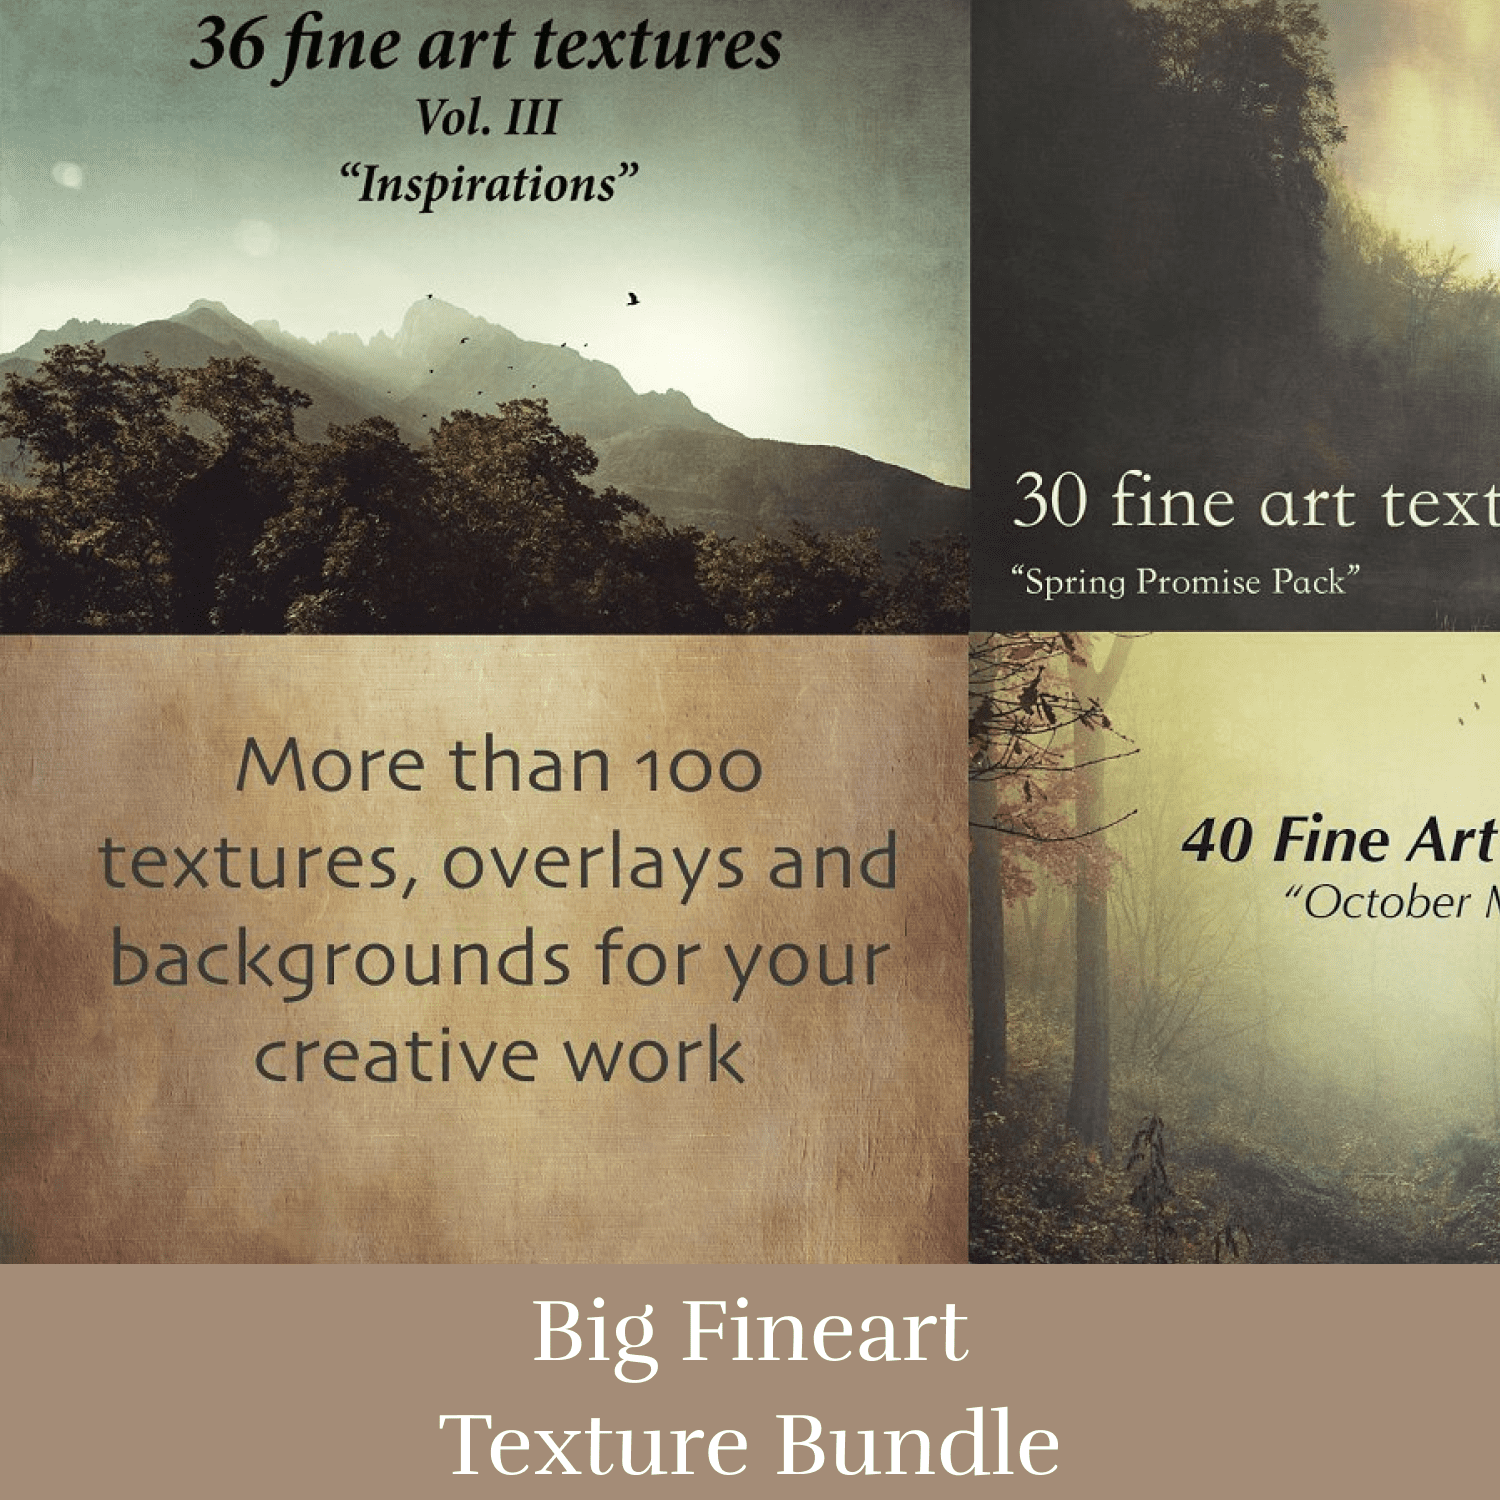 More than 100 textures, overlays and backgrounds for your creative work.